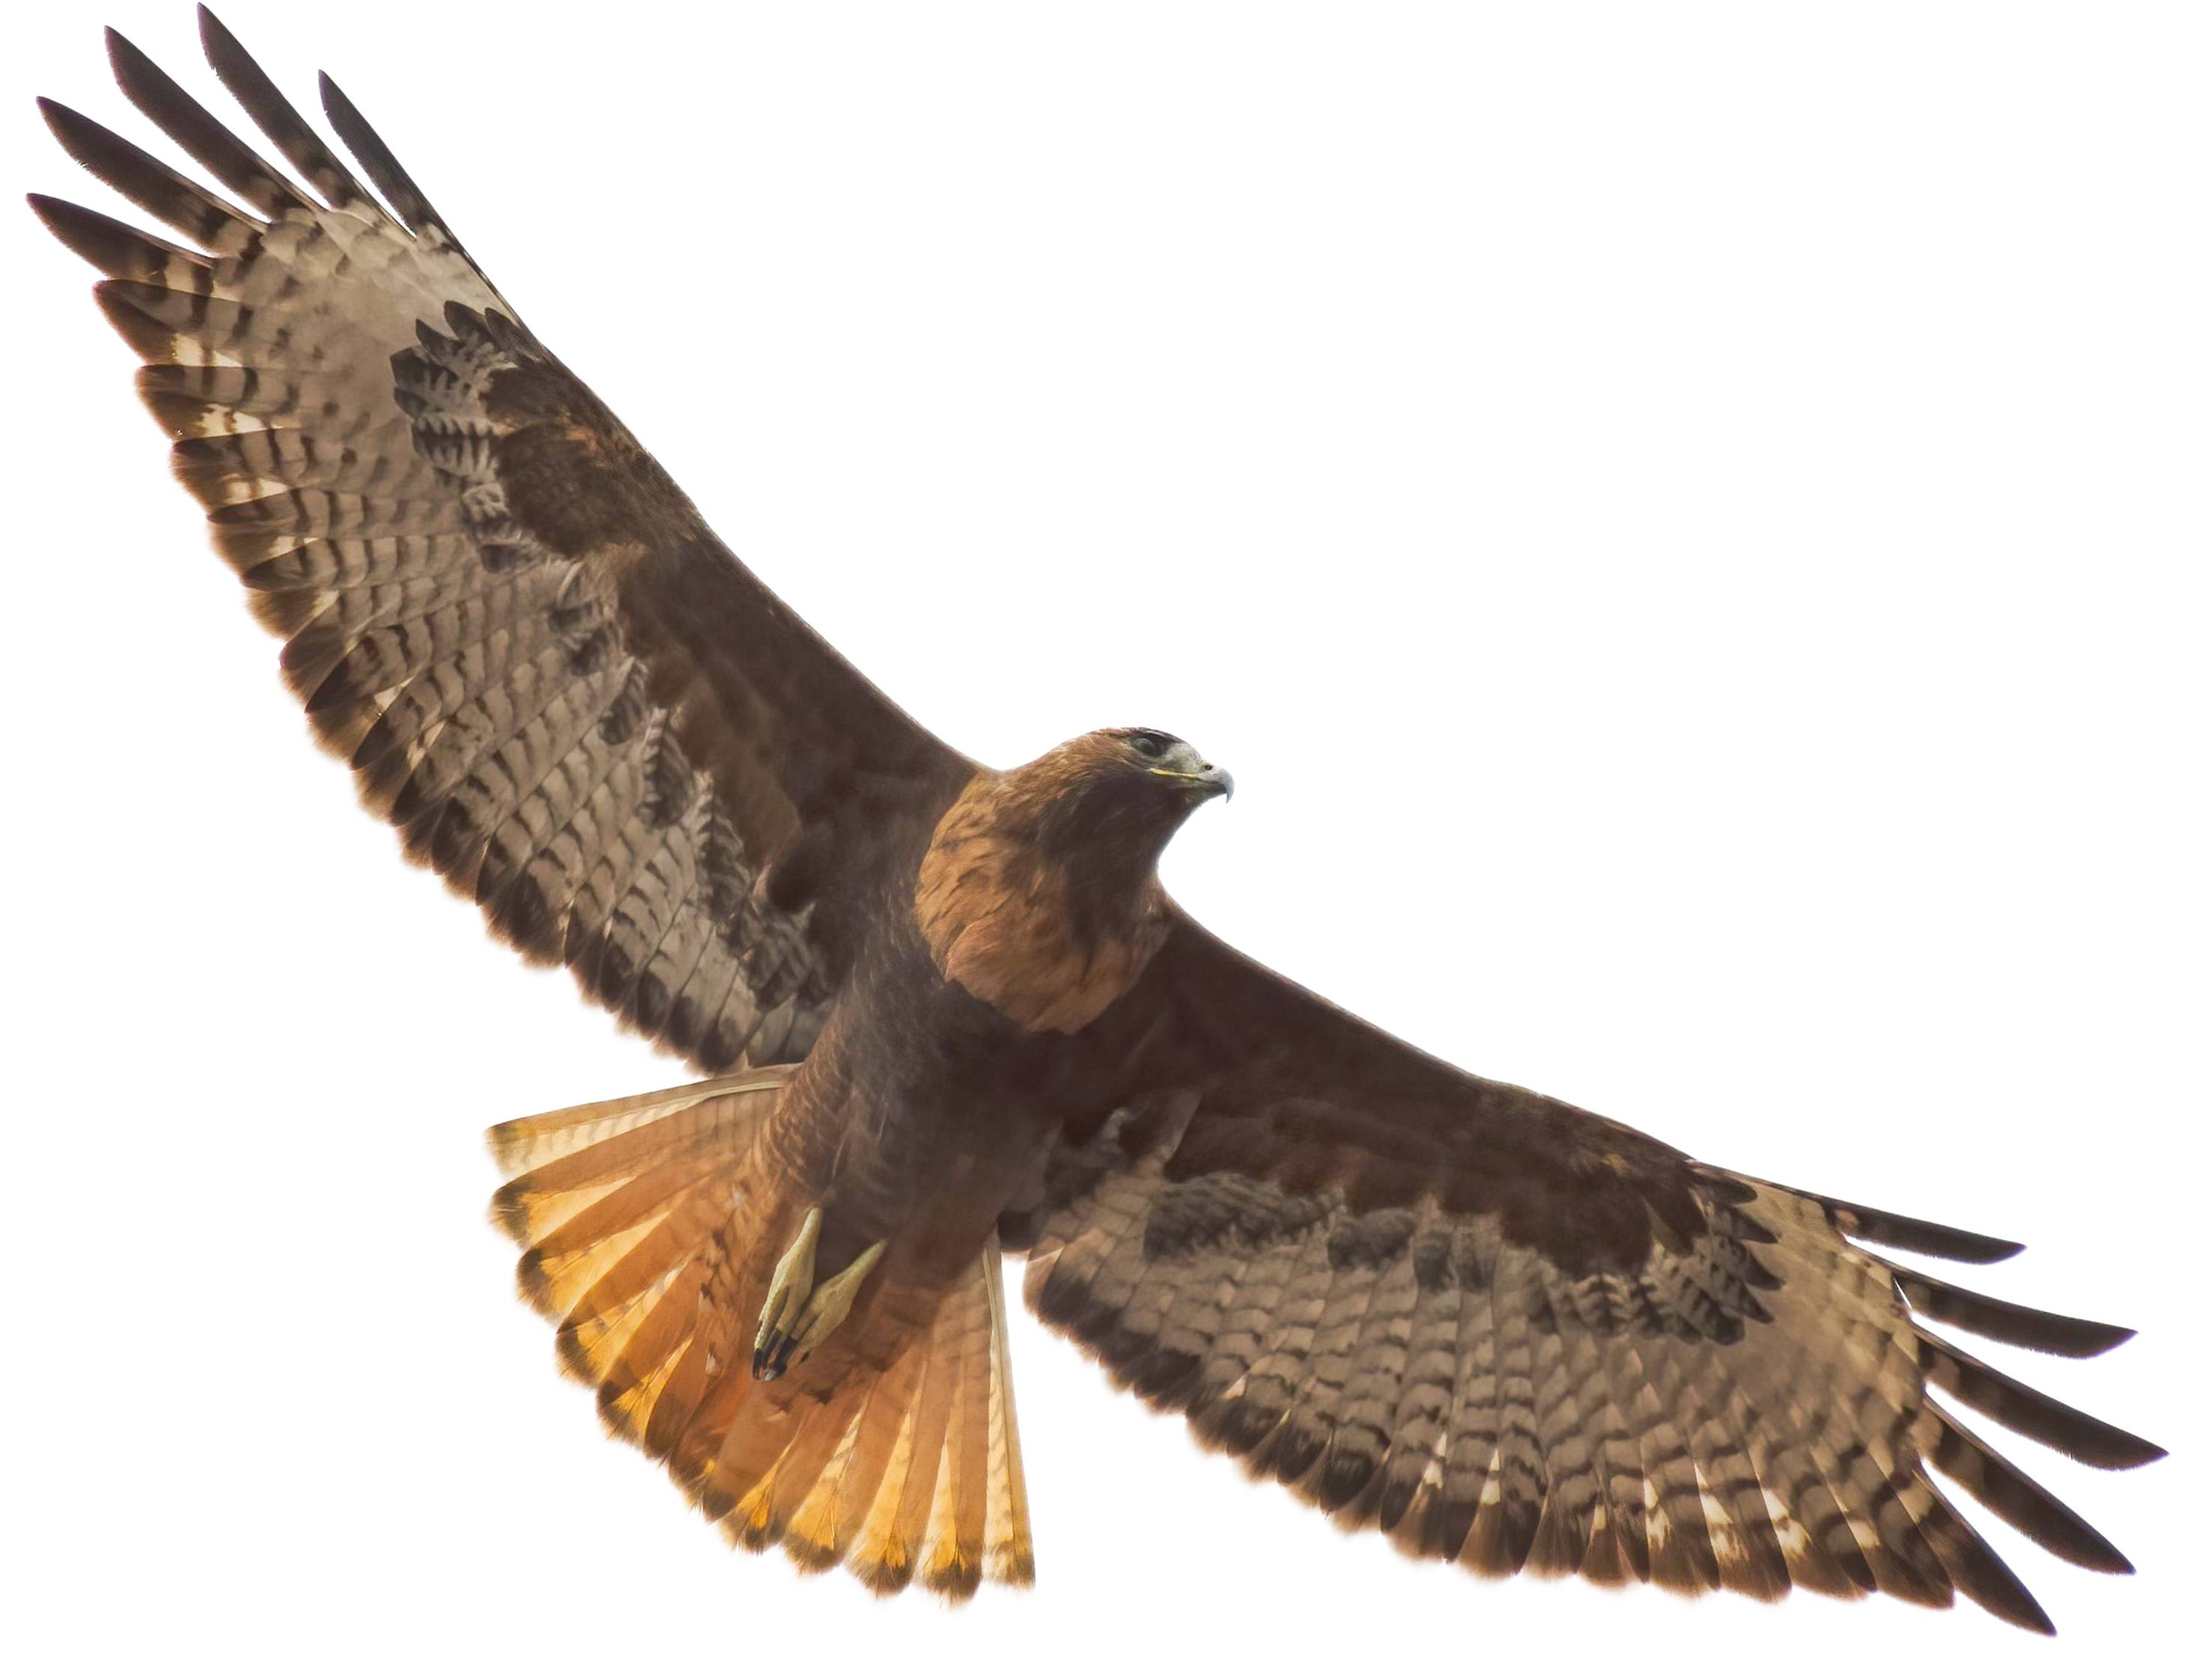 A photo of a Red-tailed Hawk (Buteo jamaicensis)